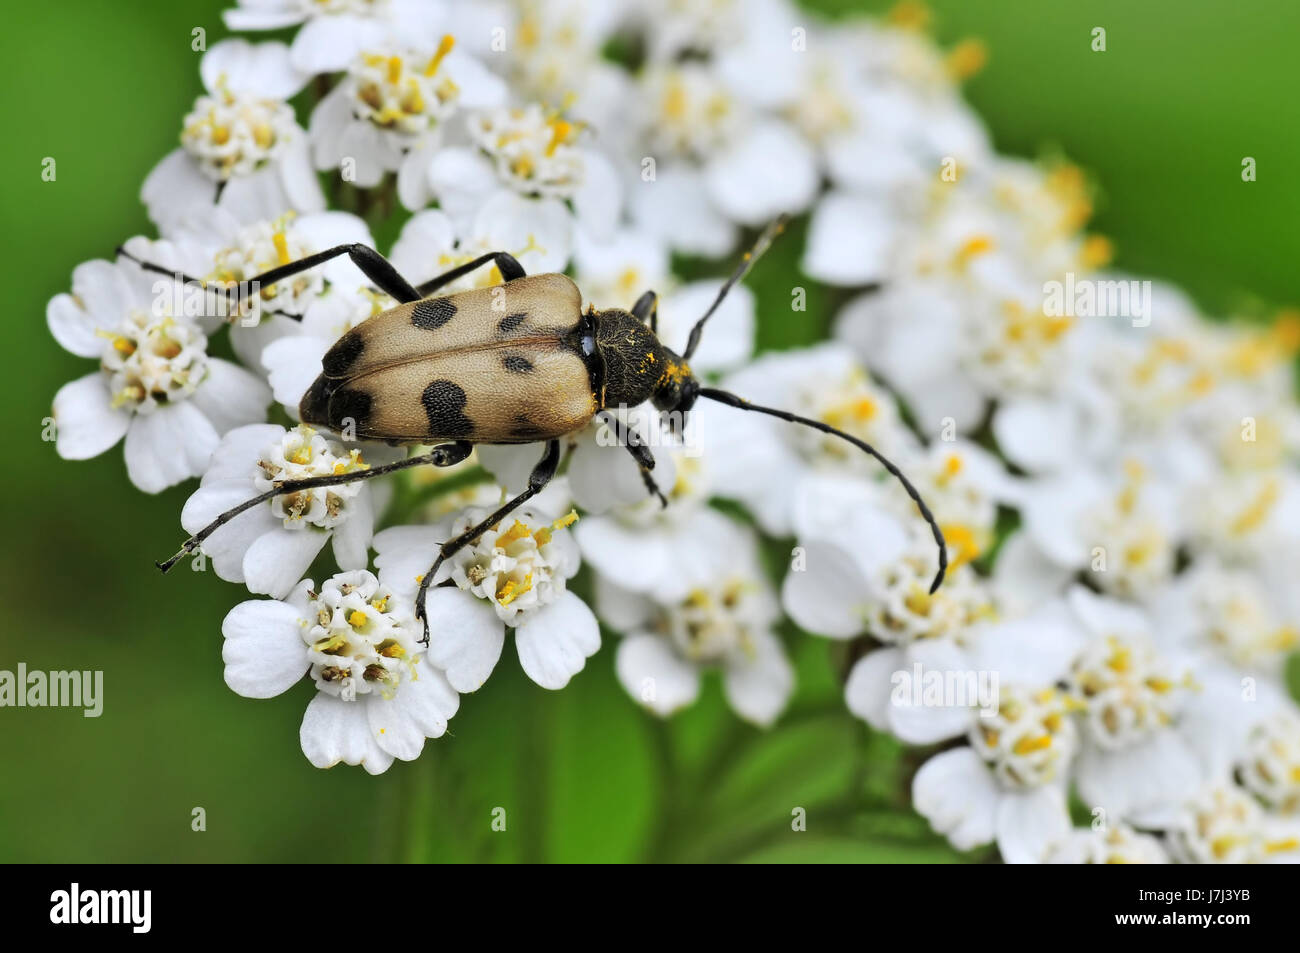 animal insect beetle macro close-up macro admission close up view detail park Stock Photo